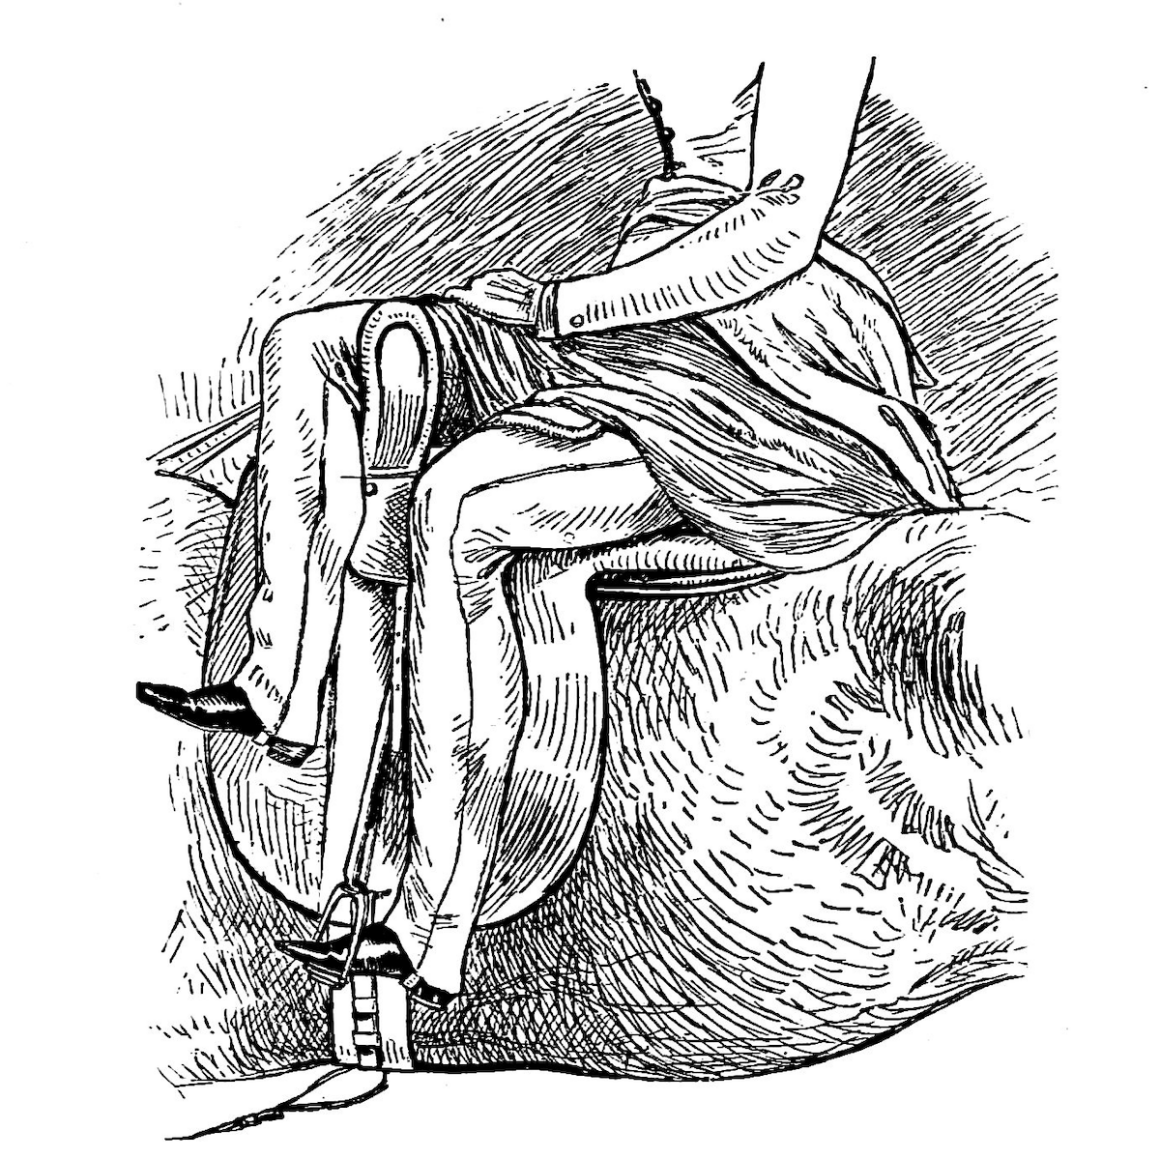 An illustration showing the correct side saddle riding position